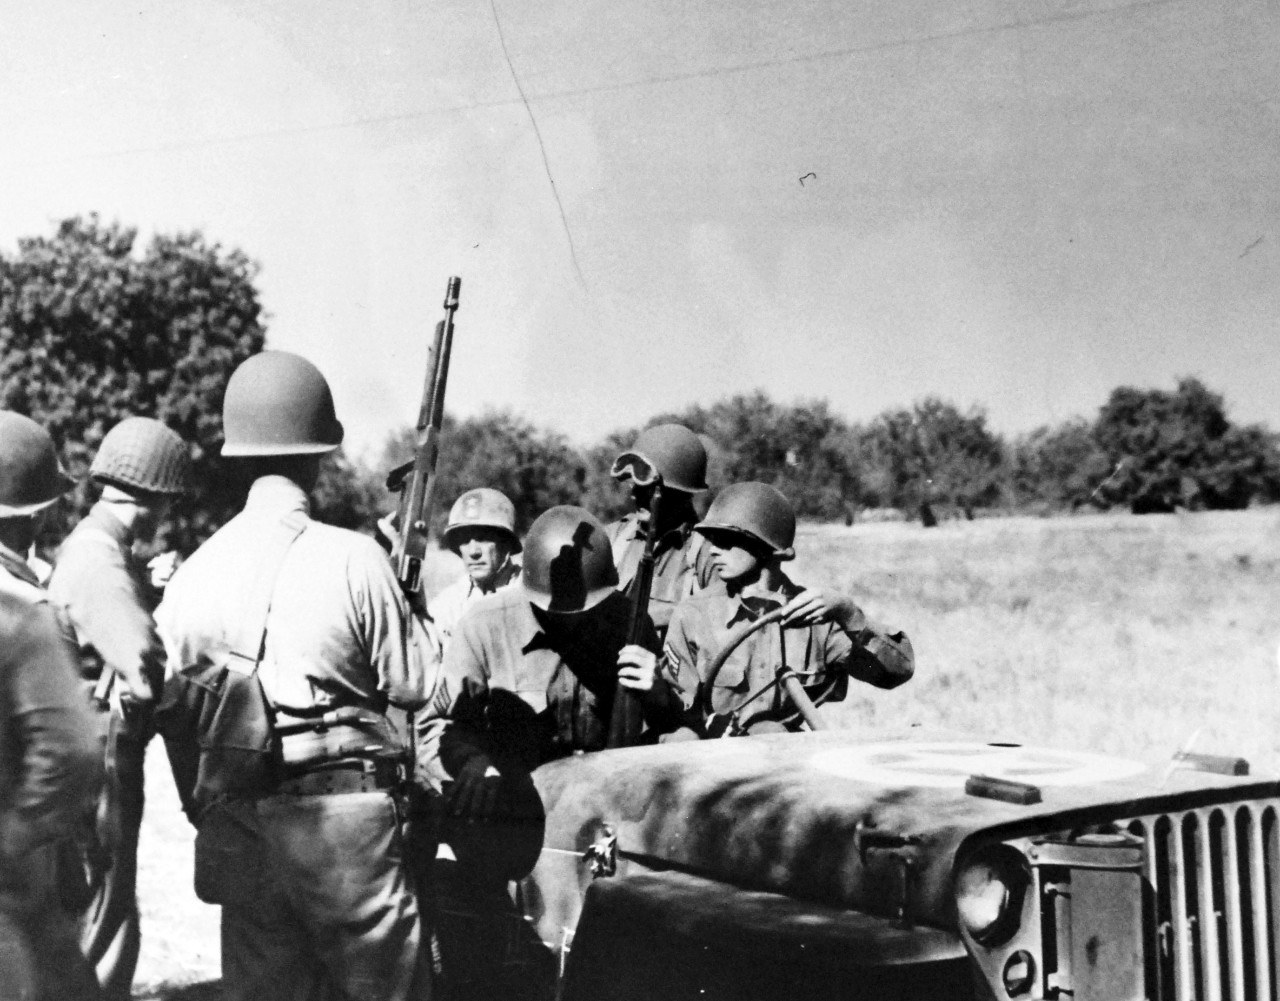 LC-Lot-805-38: Operation Husky, July-August 1943. Navy Comes Ashore.  His and of the landing operations of Sicily successfully begun, Rear Admiral Alan G. Kirk, USN, (rear), goes ashore to watch Major General Troy H. Middleton, (second right), direct ground tactics near Scoglitti.   Photograph released August 3, 1943.  Photographed through Mylar sleeve. U.S. Navy Photograph.  Courtesy of the Library of Congress.  (2015/10/30).